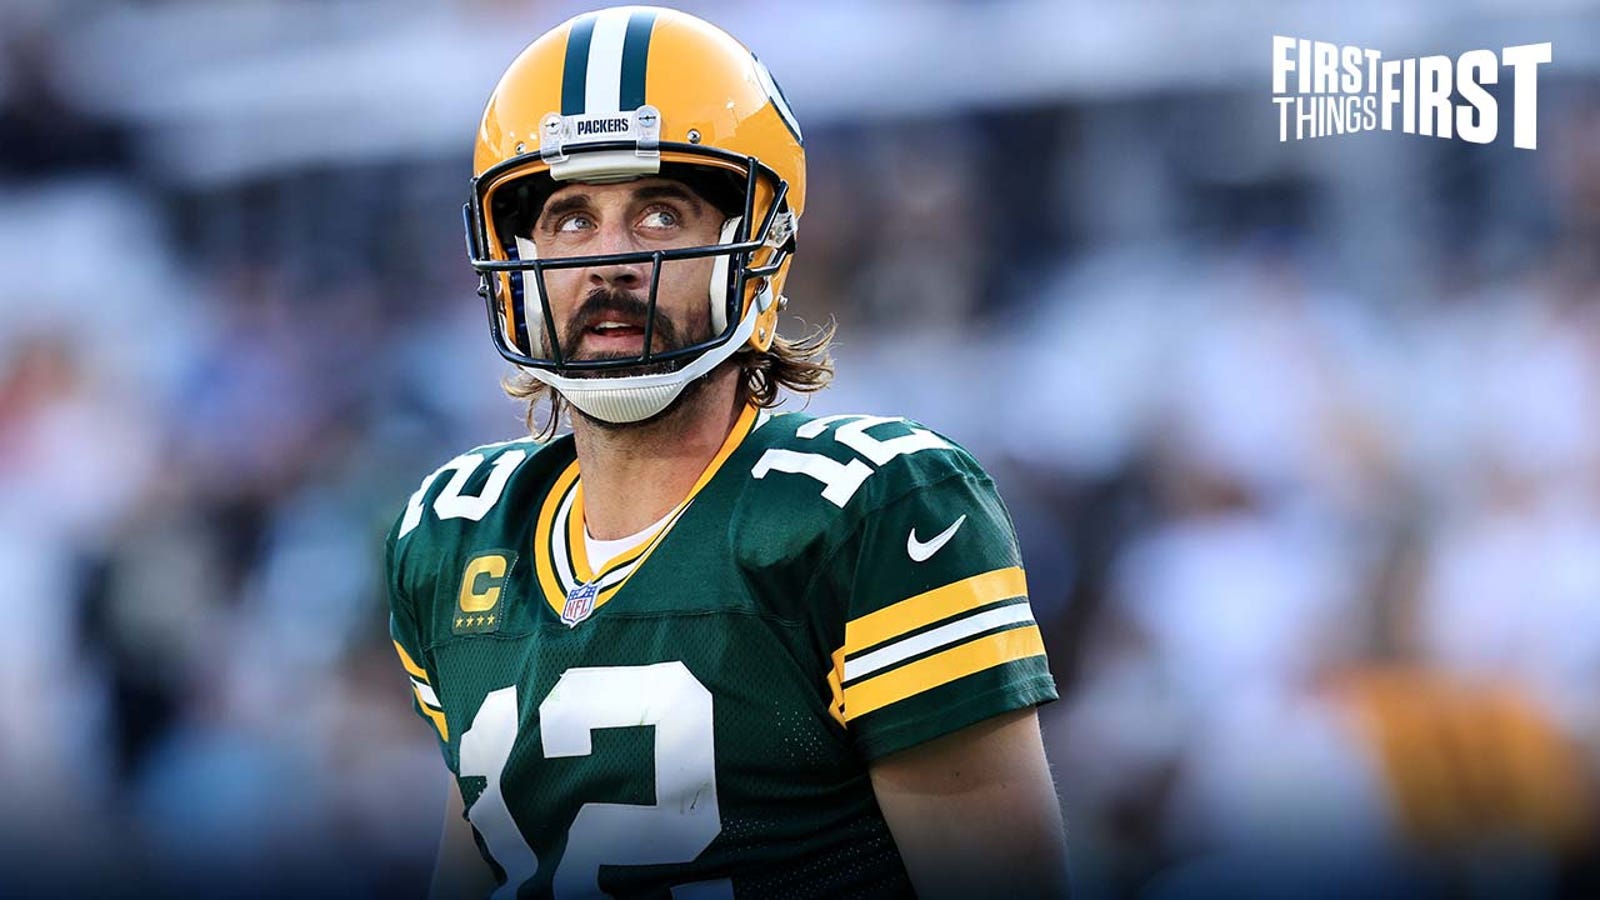 Chris Broussard on Packers' blowout loss to Saints: 'Clearly Aaron Rodgers' mind was elsewhere' I FIRST THINGS FIRST